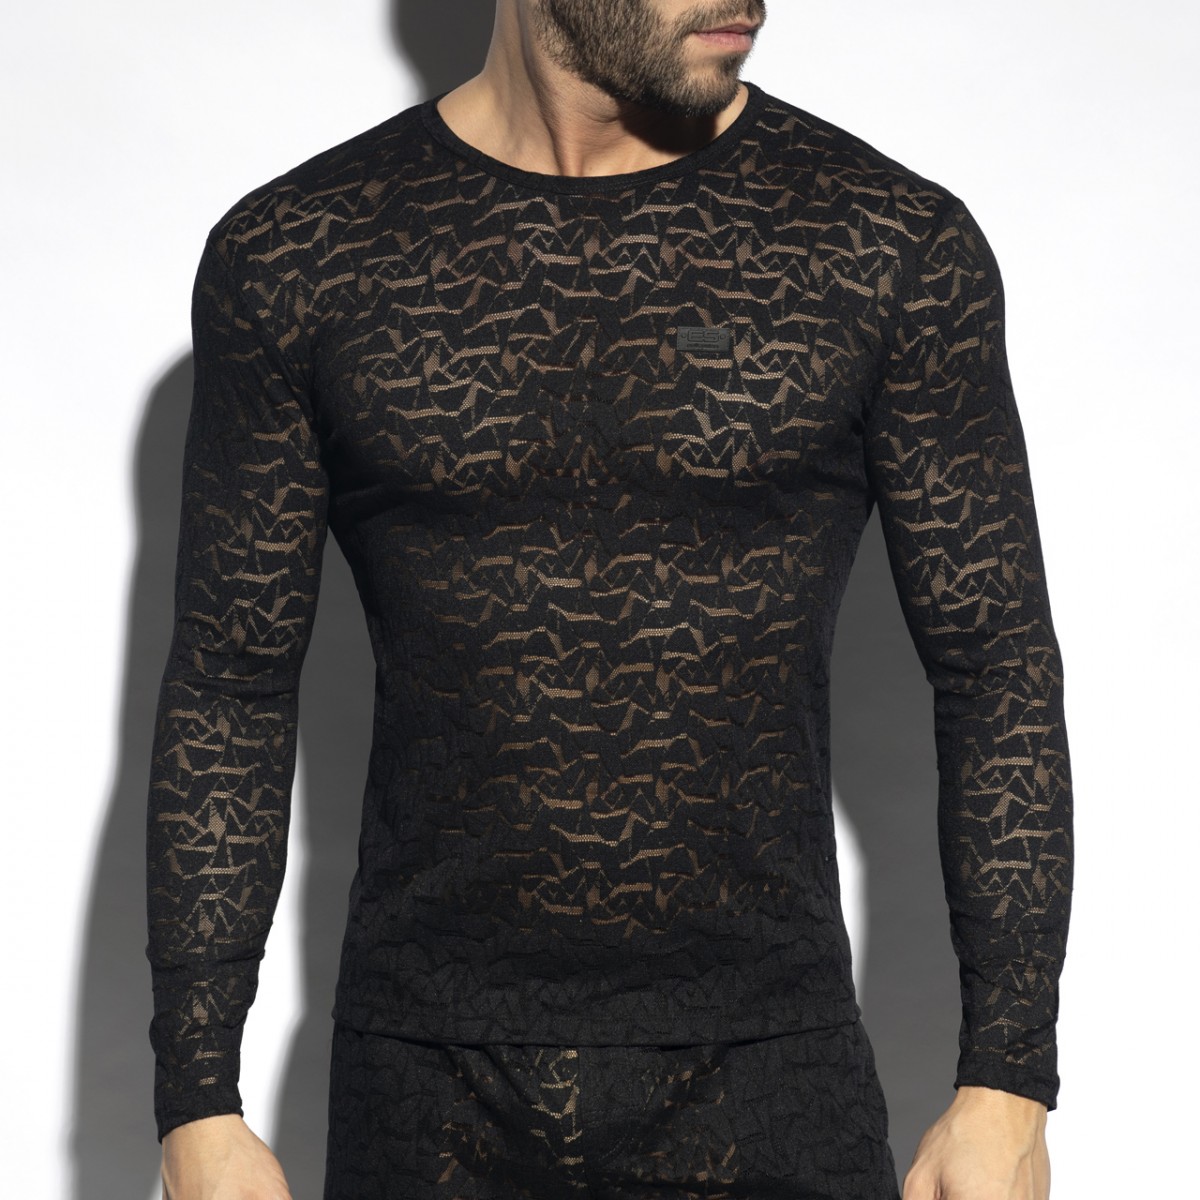 ES Collection Spider Long Sleeves T-Shirt black